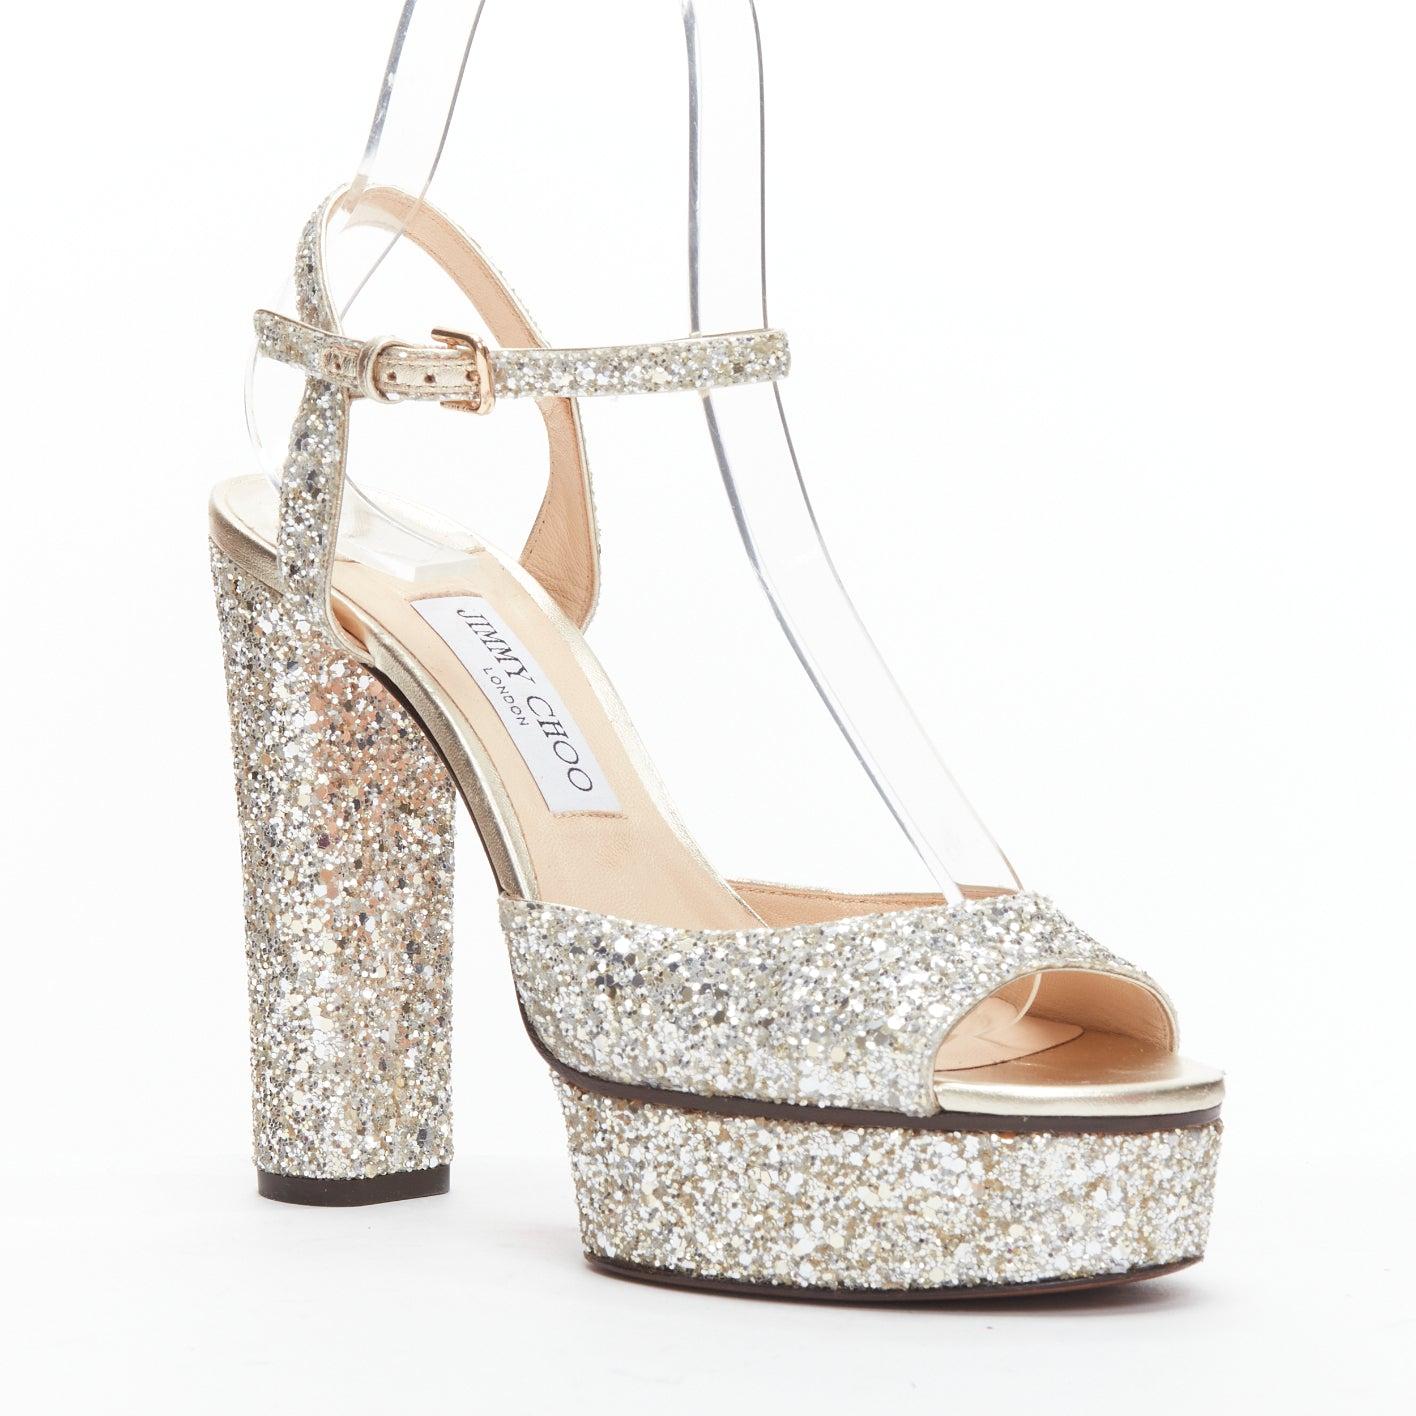 JIMMY CHOO silver glitter open toe ankle strap platform heels EU39
Reference: BSHW/A00171
Brand: Jimmy Choo
Material: Leather
Color: Silver
Pattern: Solid
Closure: Ankle Strap
Lining: Nude Leather
Extra Details: Chunky heels.
Made in: